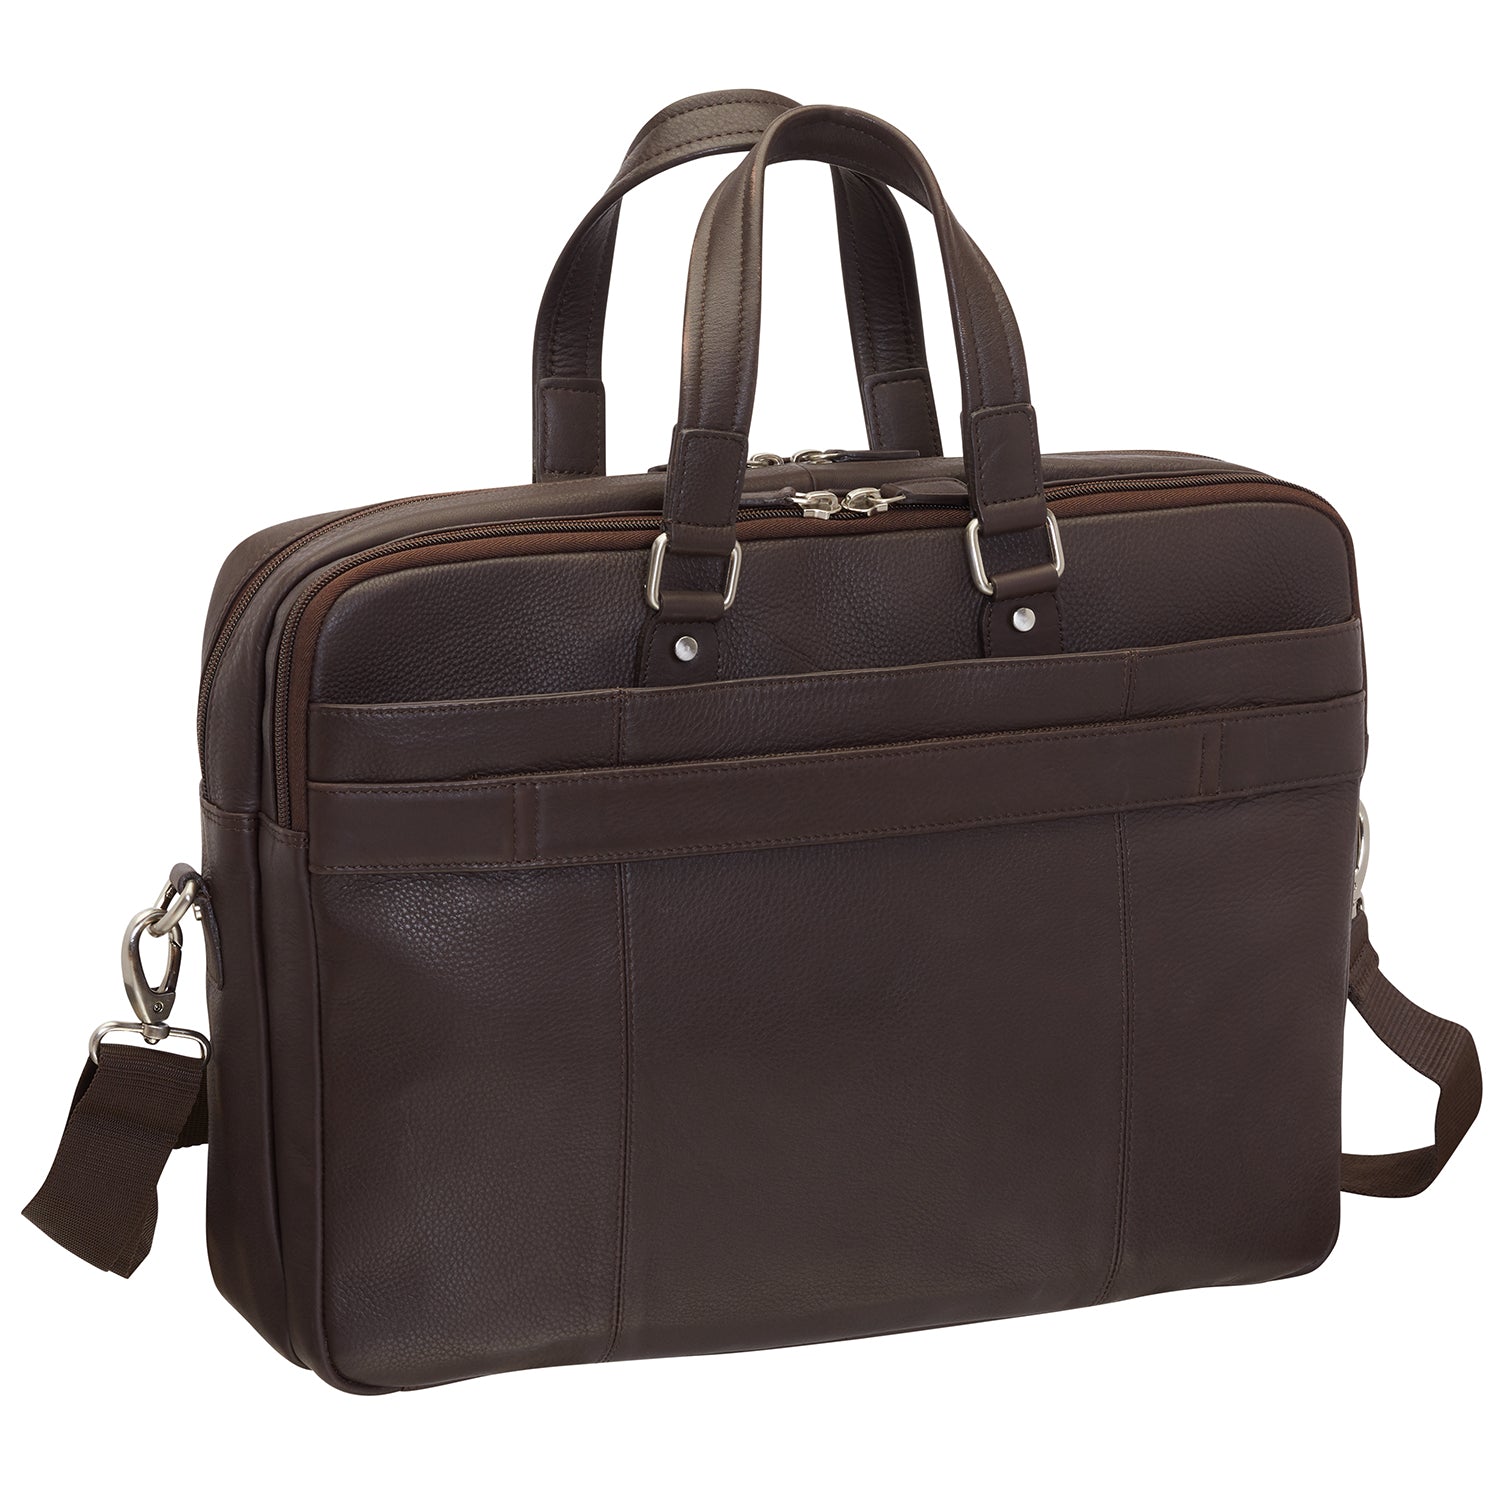 Mancini Leather Double Compartment Briefcase for 15.6" Laptop and Tablet, 16.25" x 4" x 12", Brown